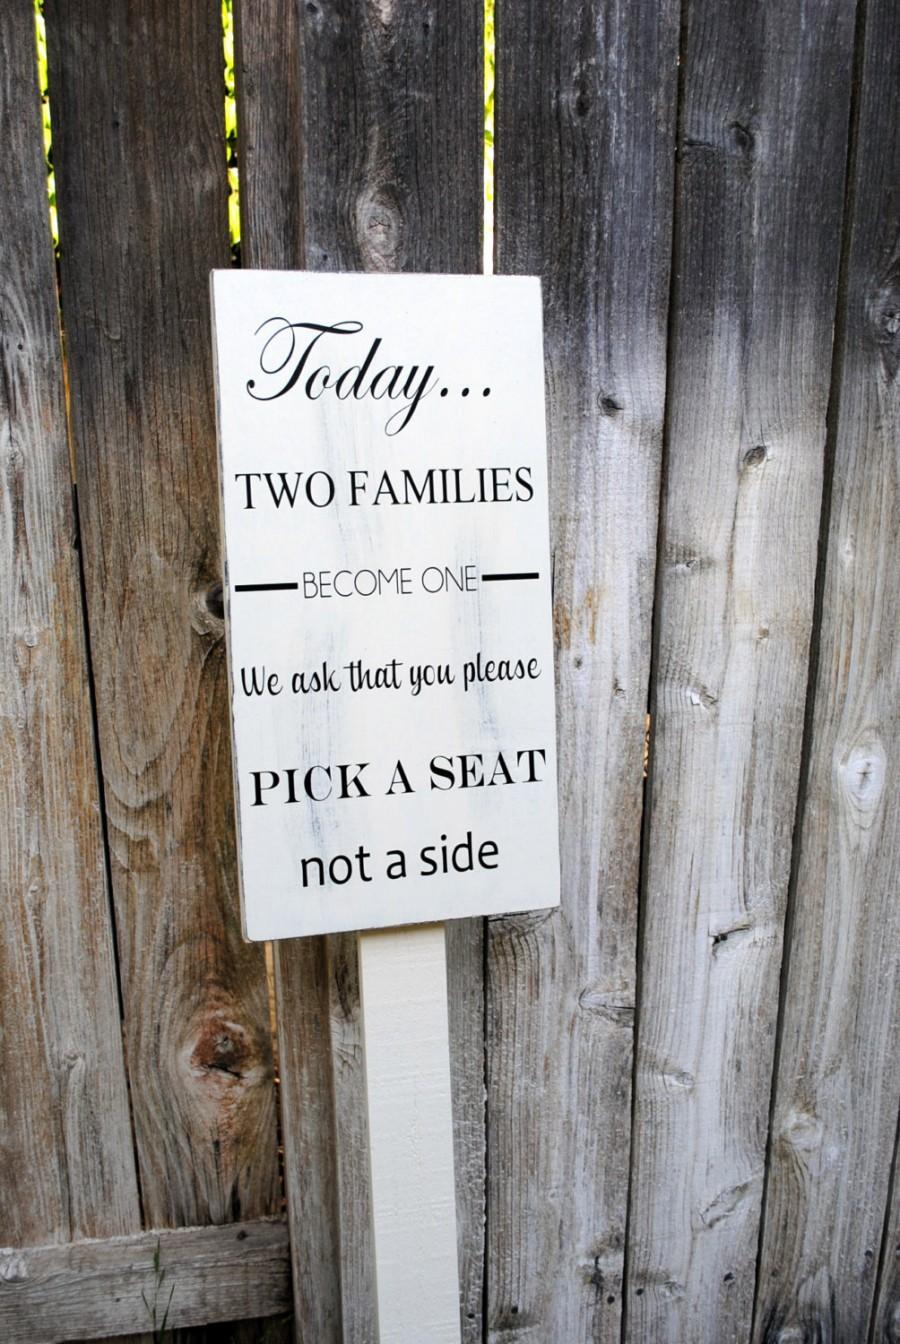 Свадьба - 10"x18 shabby chic Today, two families become one, pick a seat not a side wood sign, seating sign ON STAKE